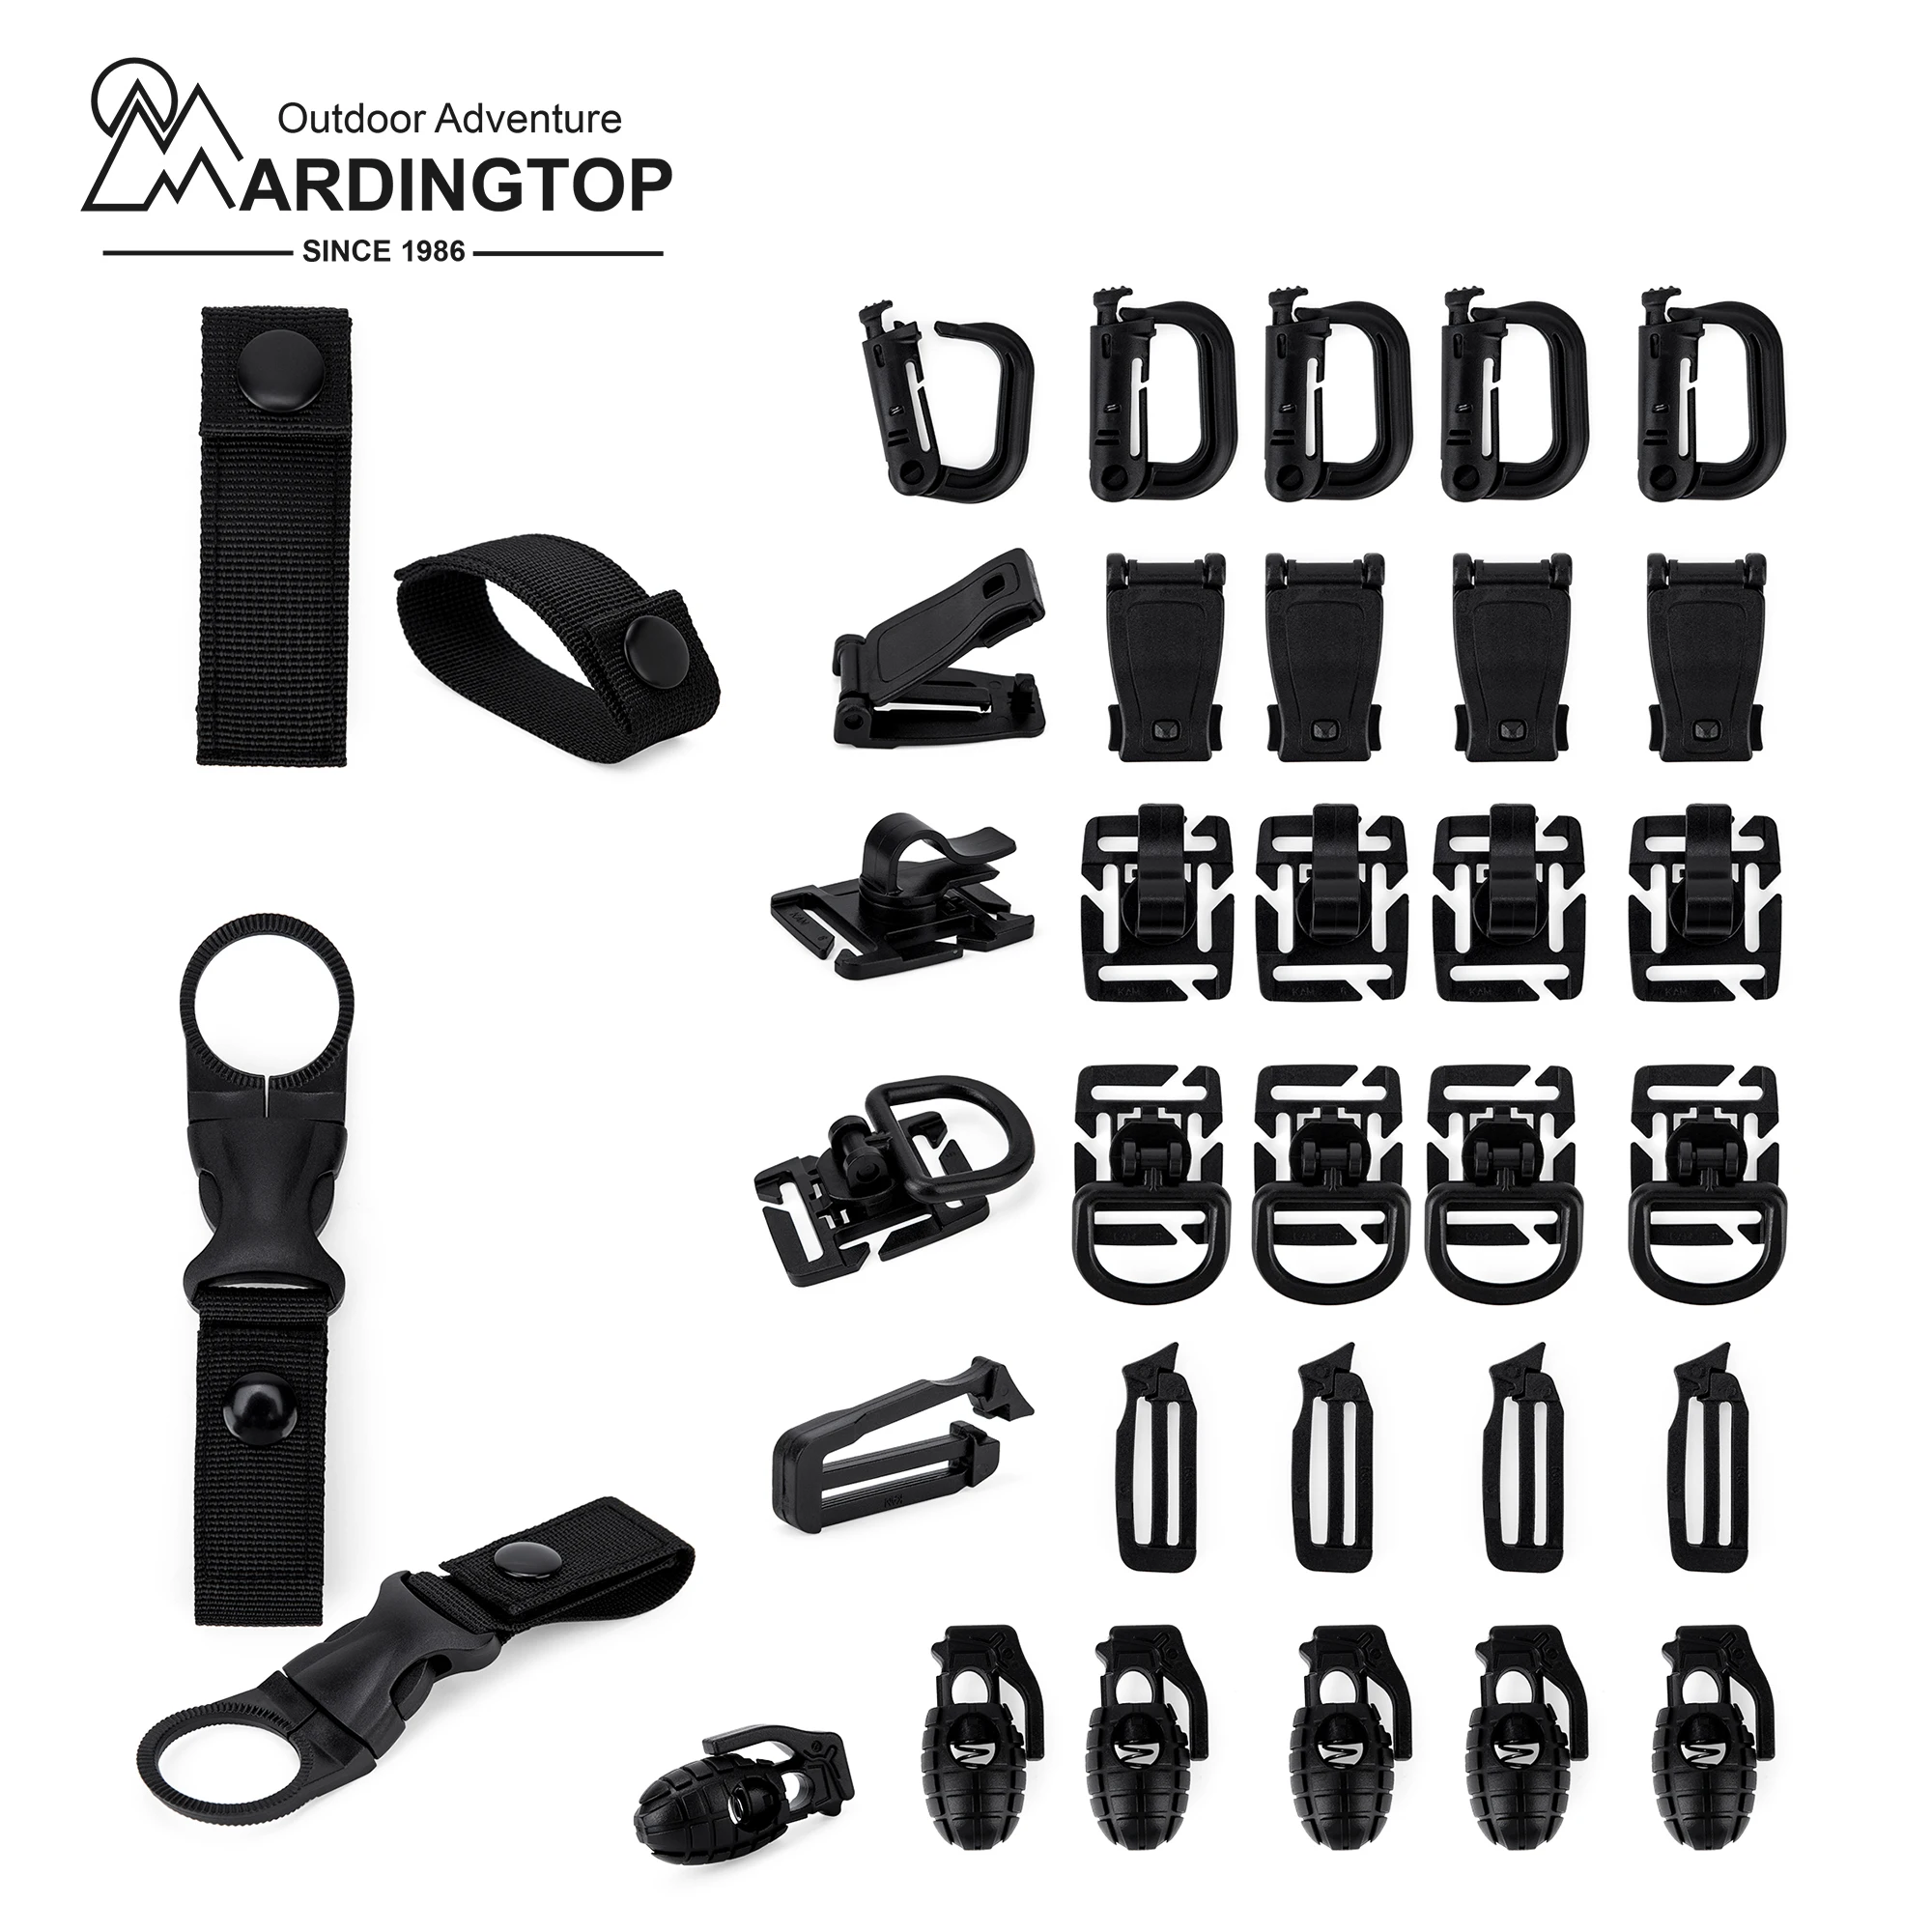 MARDINGTOP 35-Pcs MOLLE Accessories Clips Kit for Attaching Gear with MOLLE System Increase Capacity and Versatility of Backpack